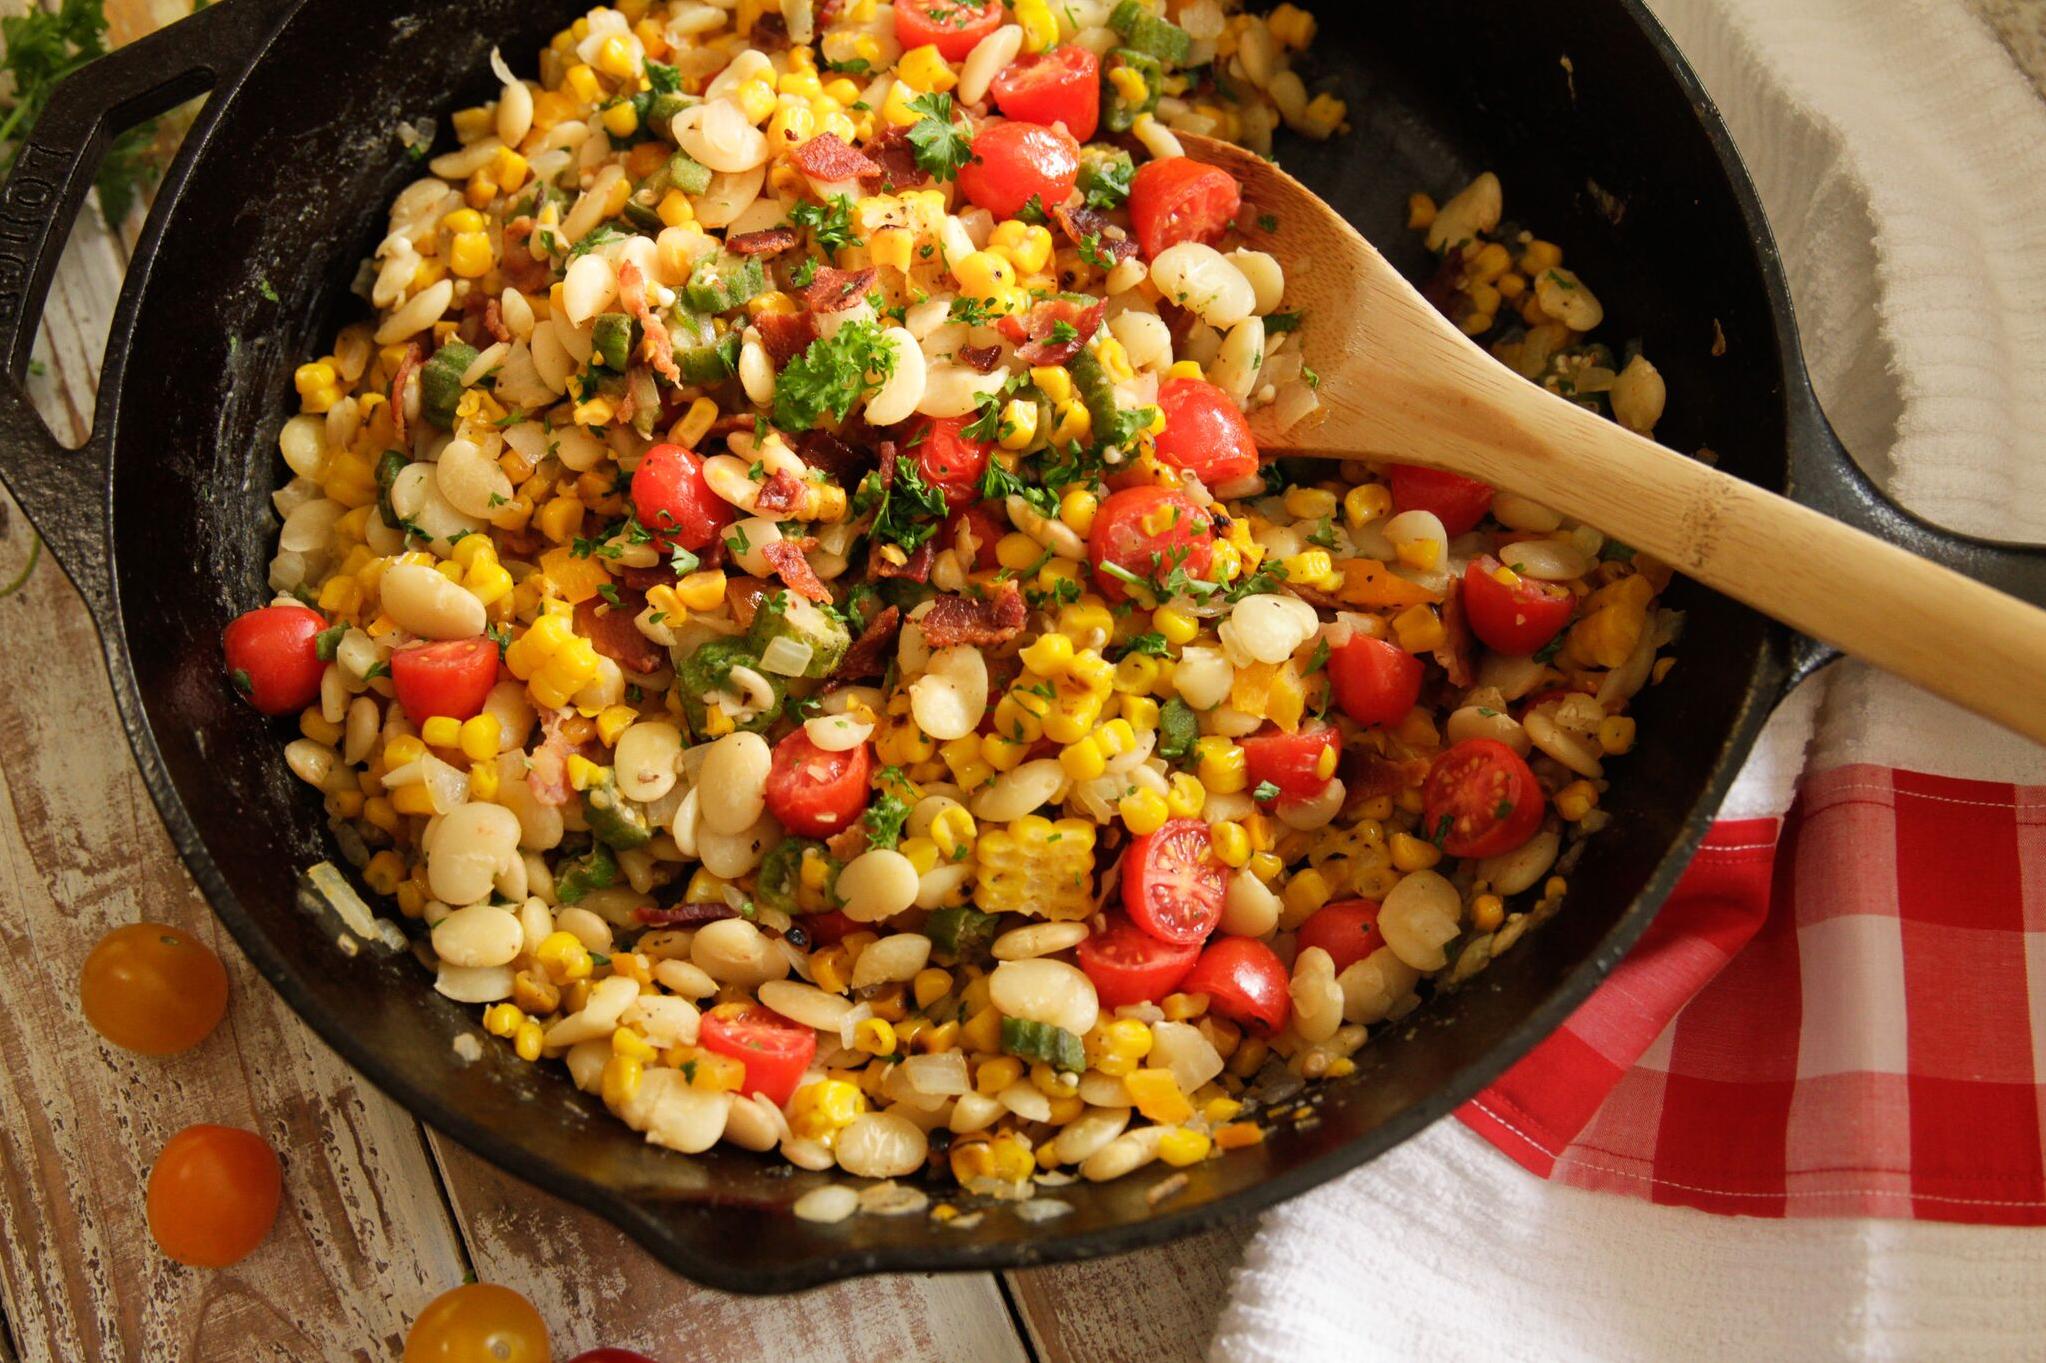  Get ready to enjoy a bowl of the South with this Southern Style Succotash recipe!